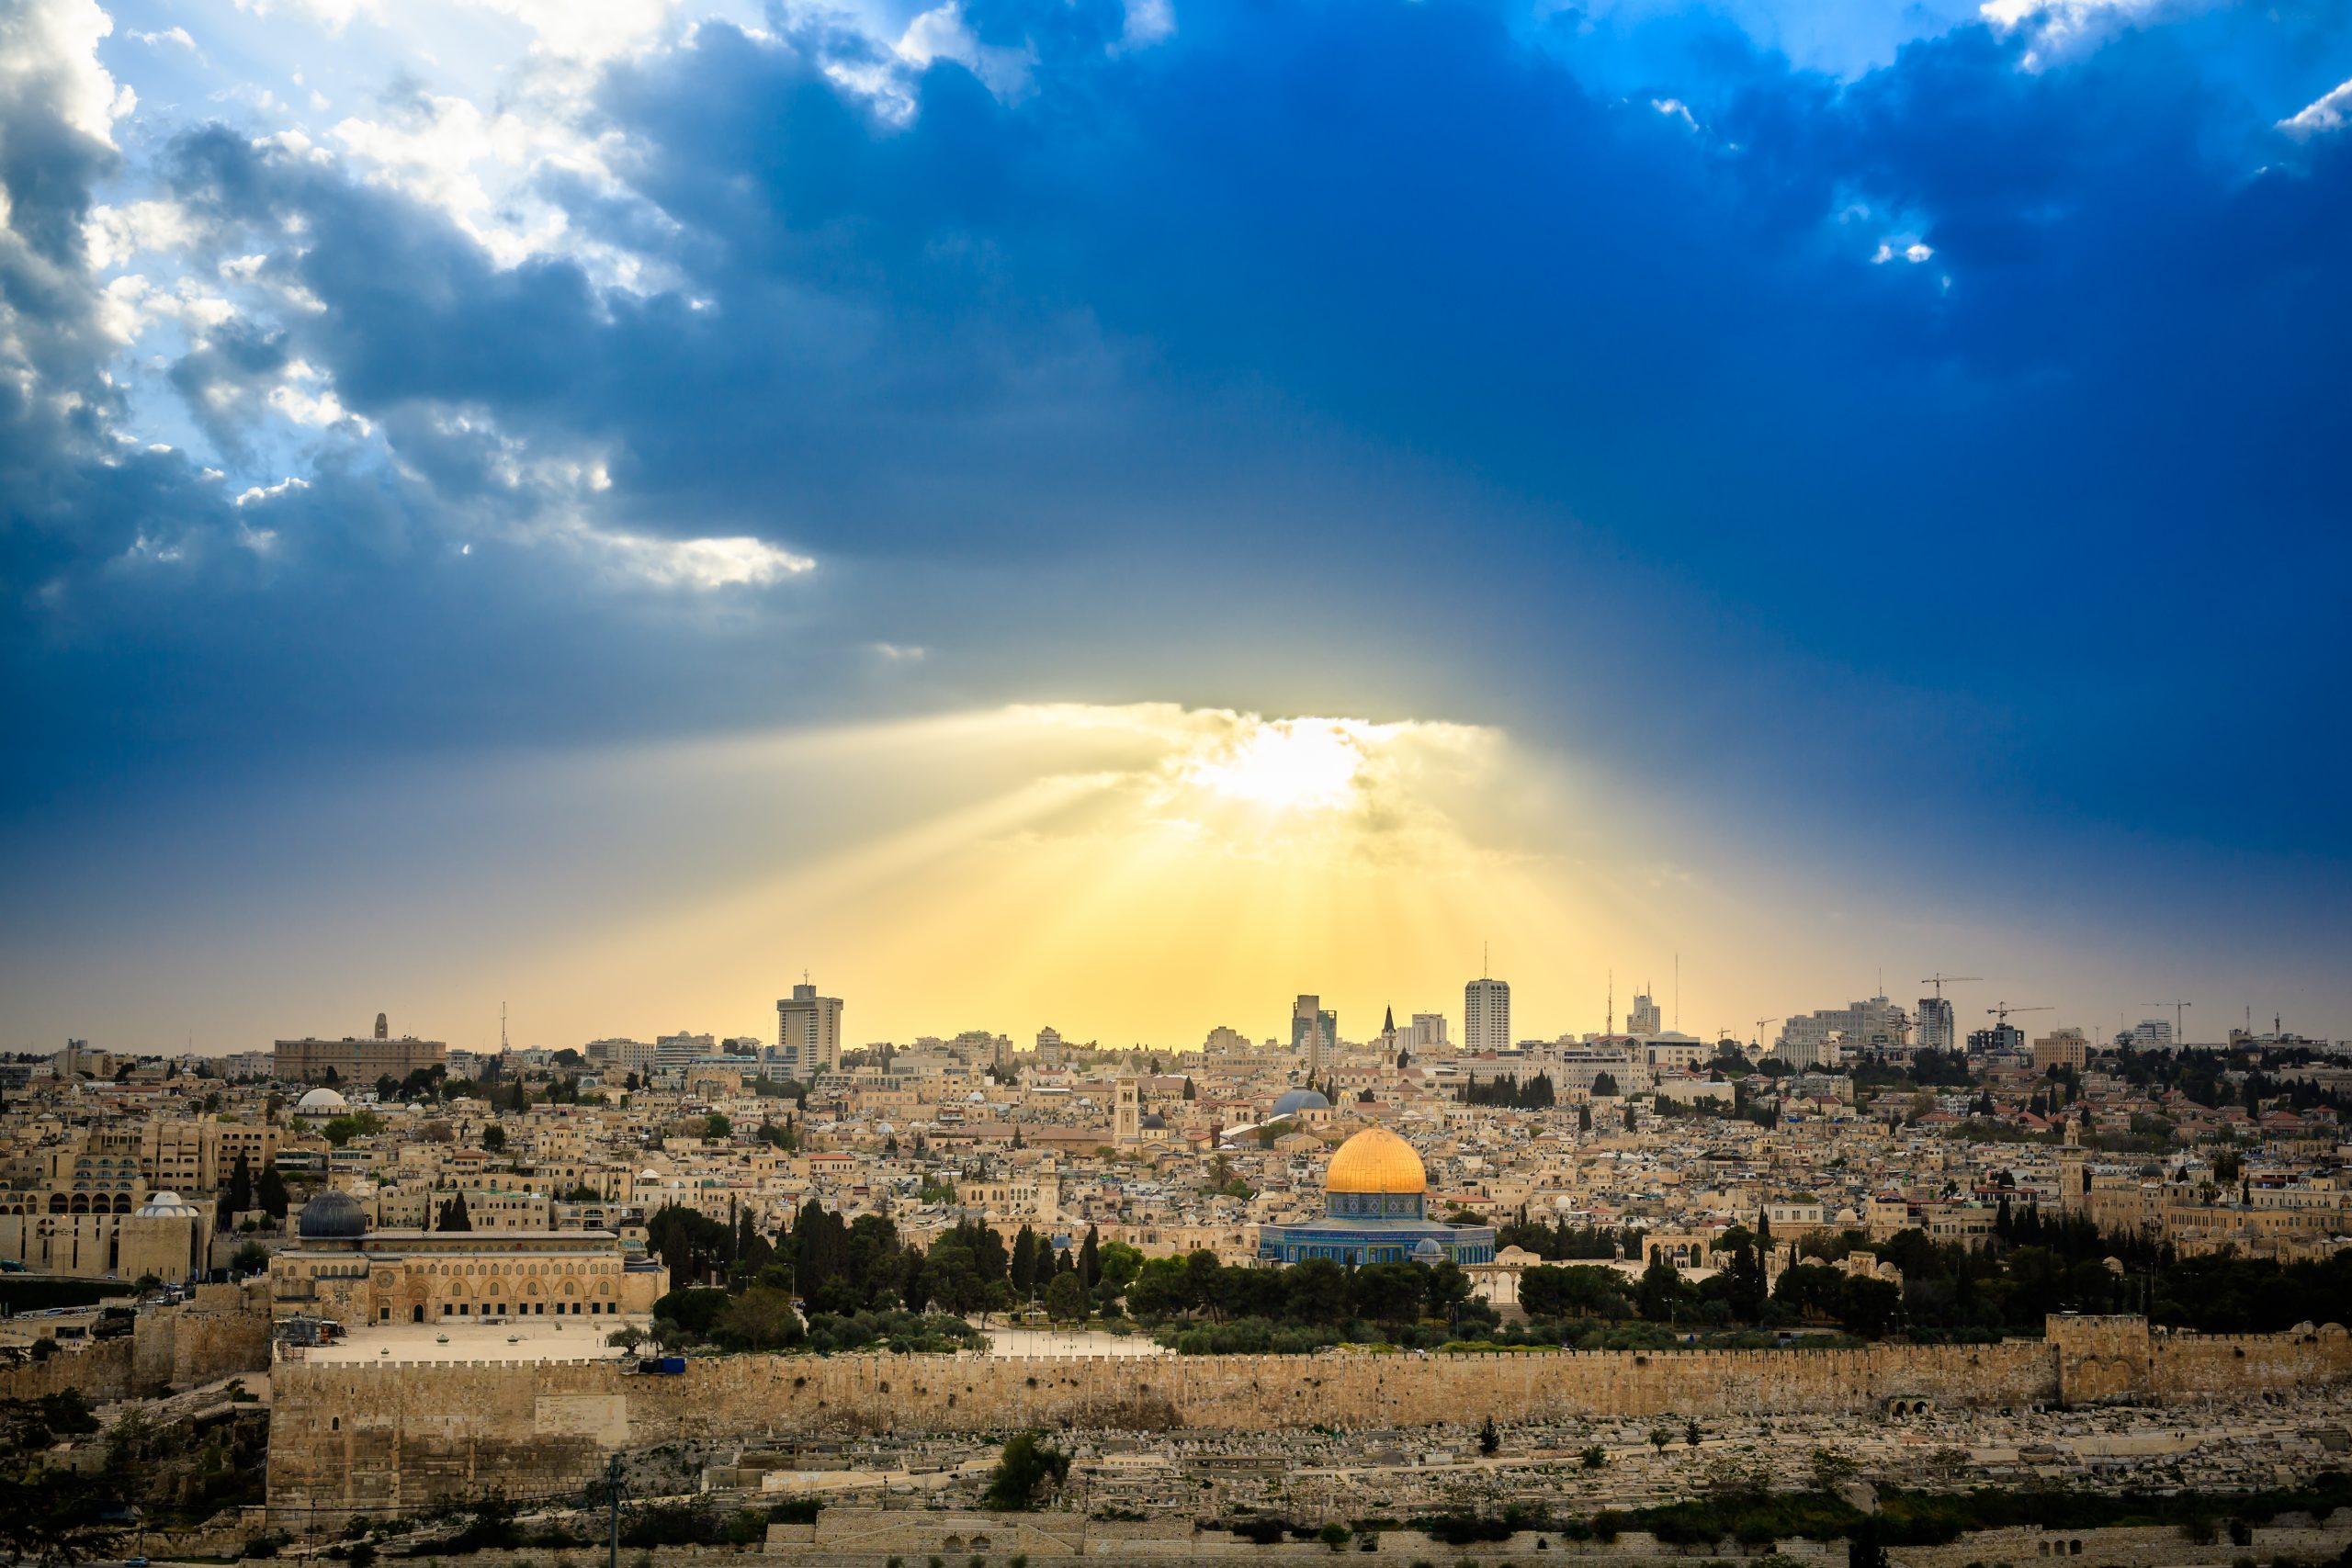 Dramatic sky over Jerusalem, view from the Olive Mountain, taken shortly before a thunderstorm